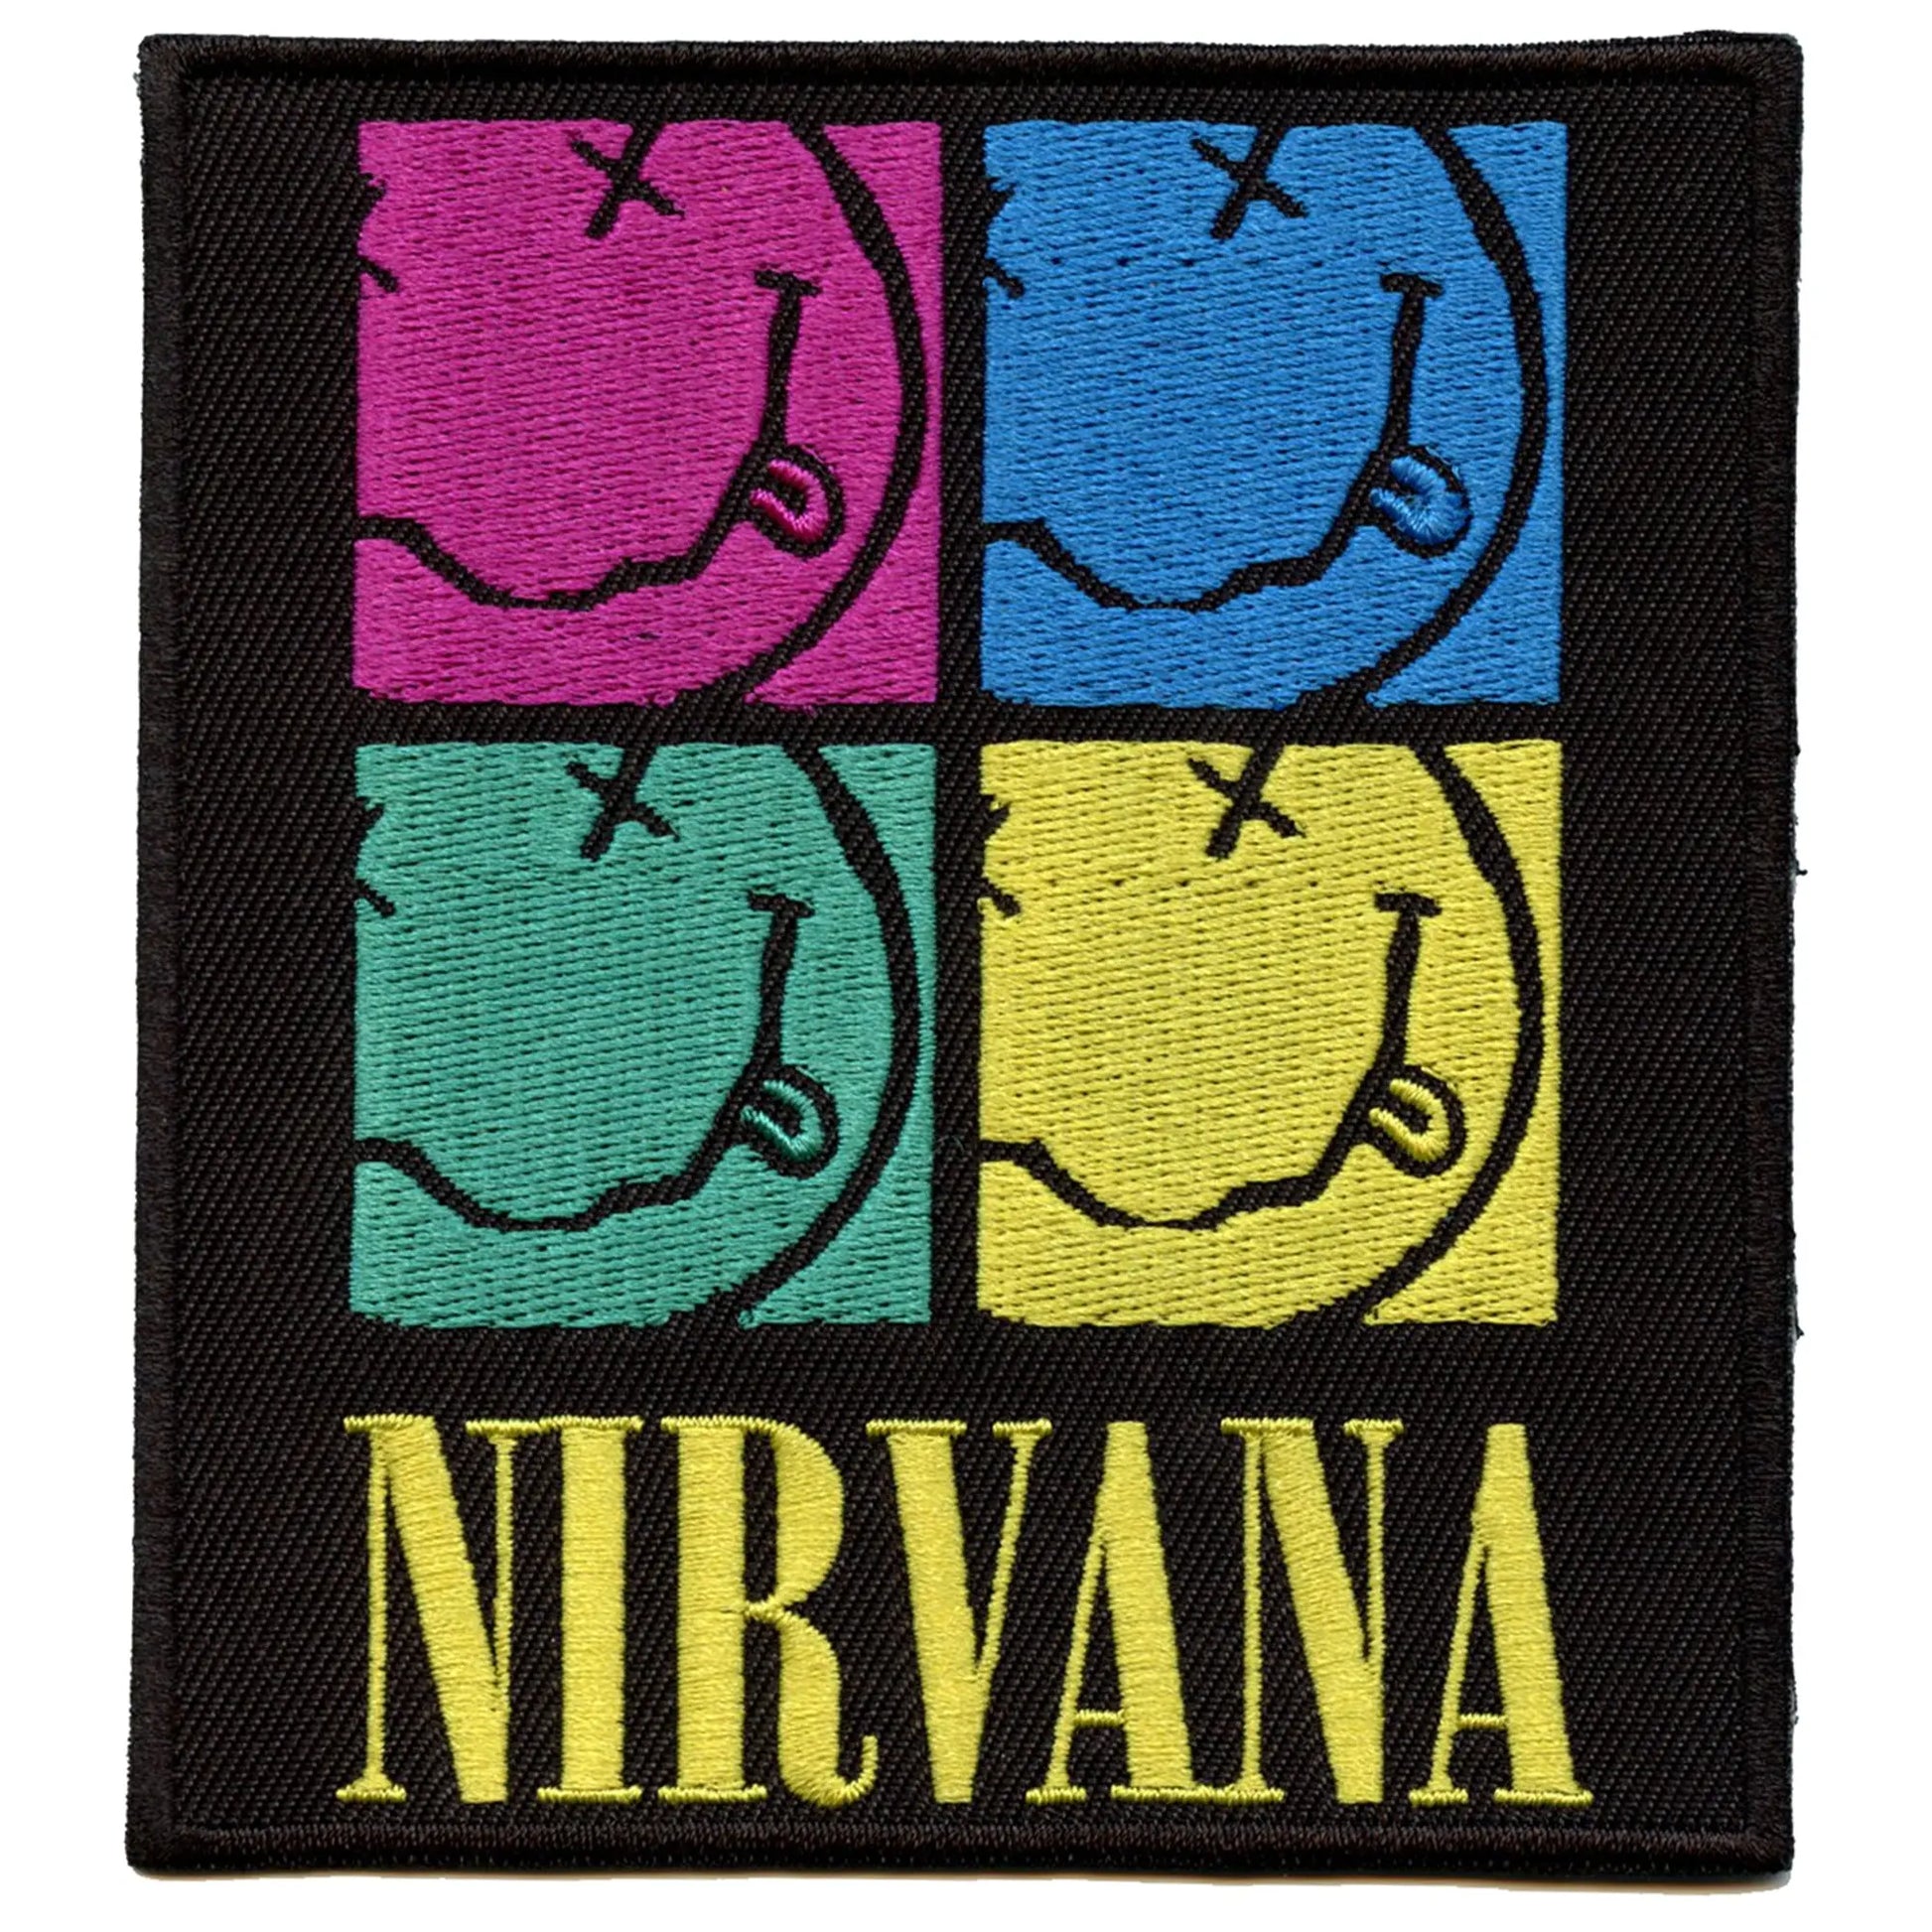 Nirvana Colorful Smiley Squares Patch Grunge Rock Band Embroidered Iron On